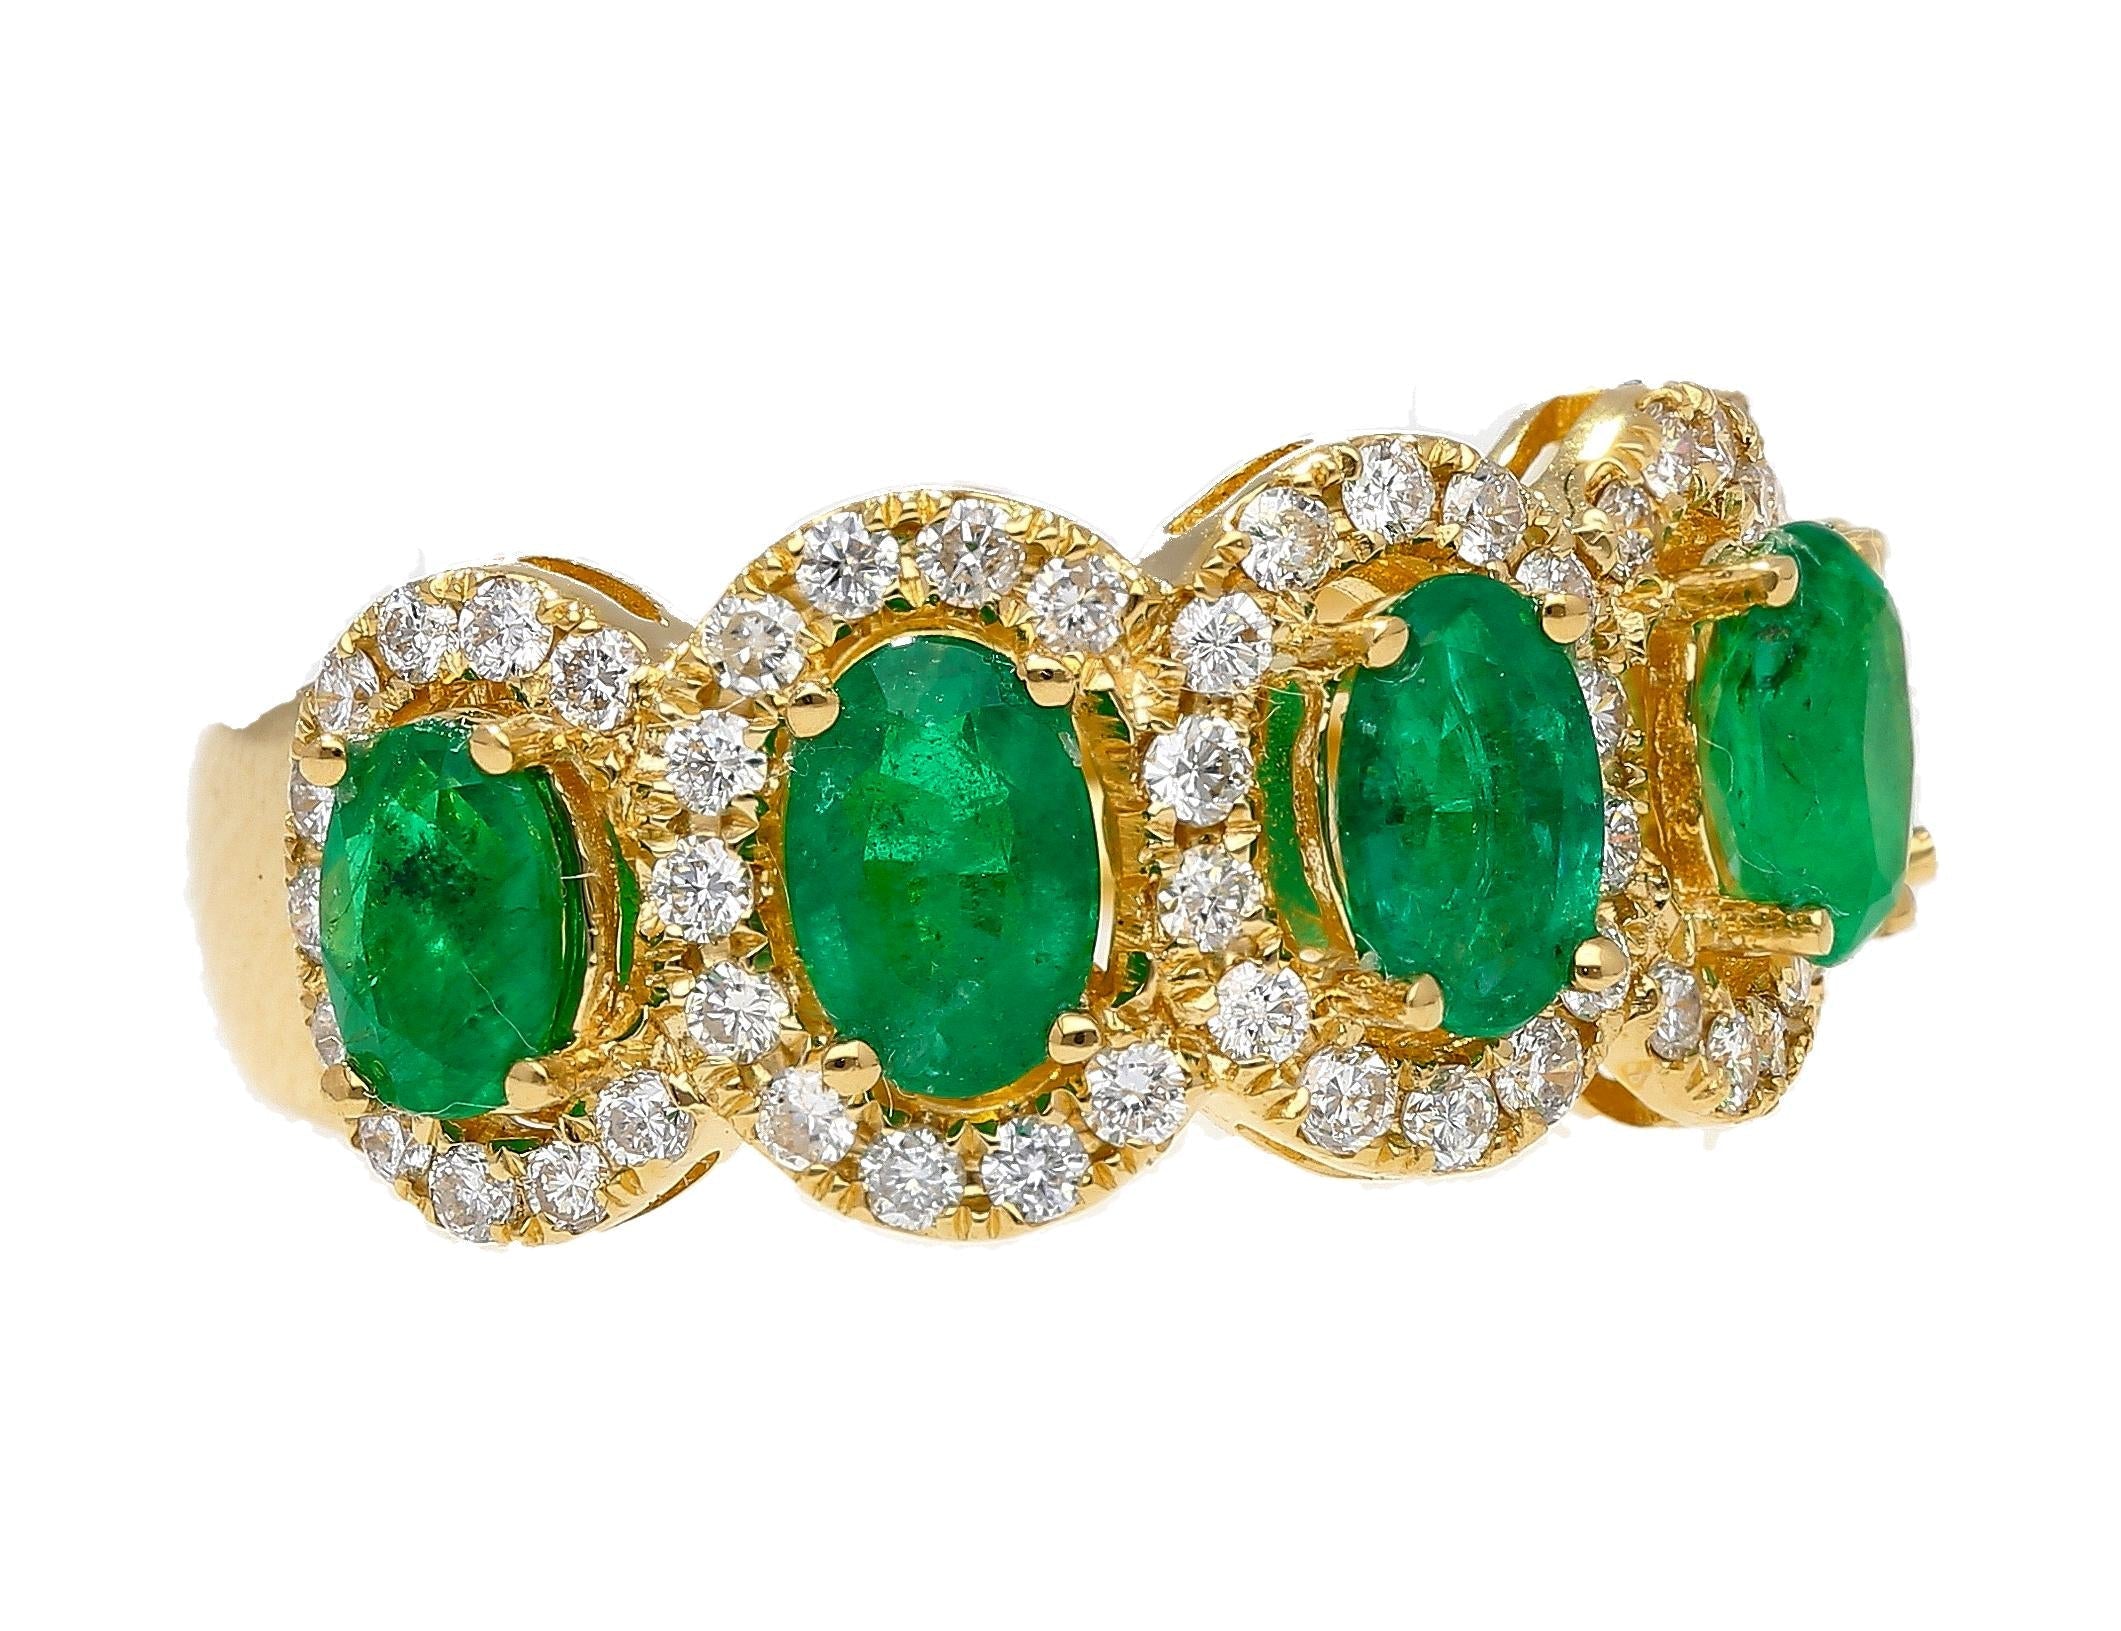 2.11 Carat Oval Cut Emerald and Diamond Wedding Band in 18K Gold